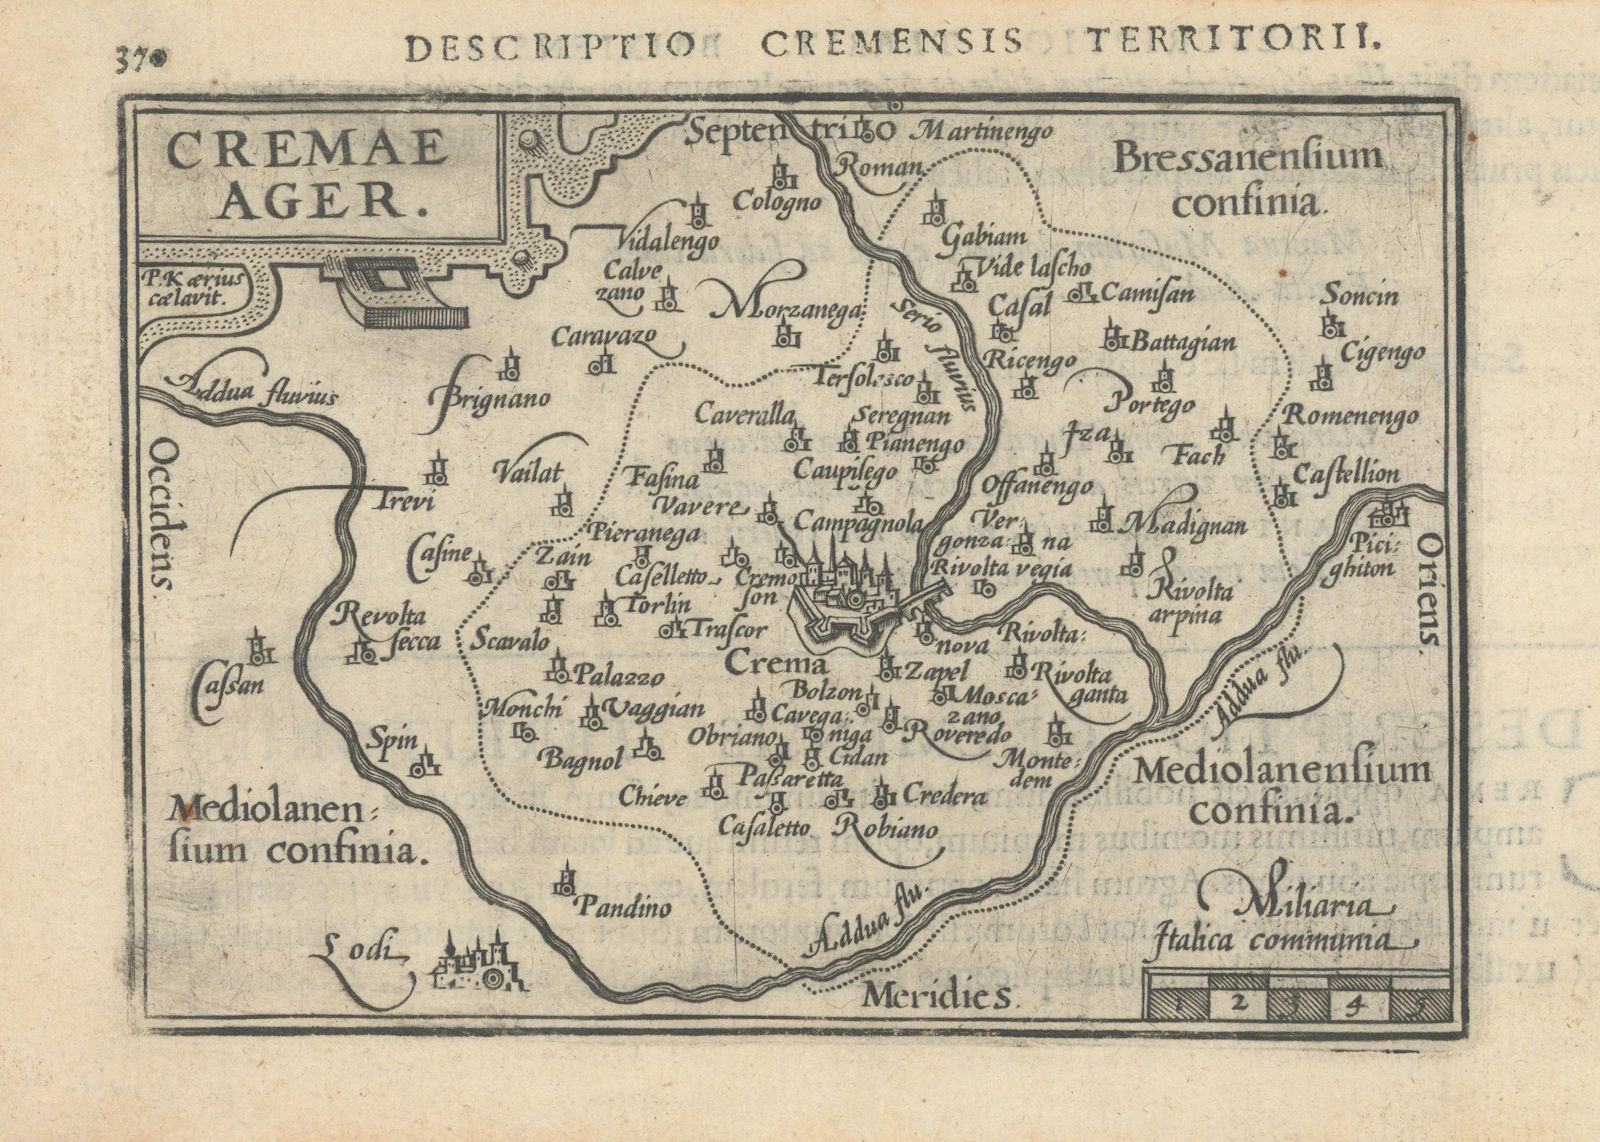 Cremae Ager by Bertius / Langenes. Territory of Crema, Lombardy 1603 old map